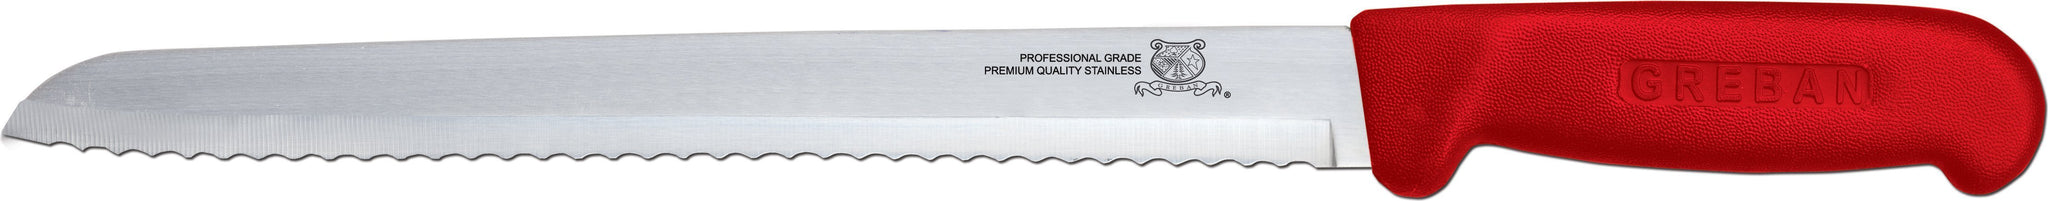 Omcan - 8” Slicer Knife with Narrow R-Wave Blade & Red Handle, 10/cs - 12622